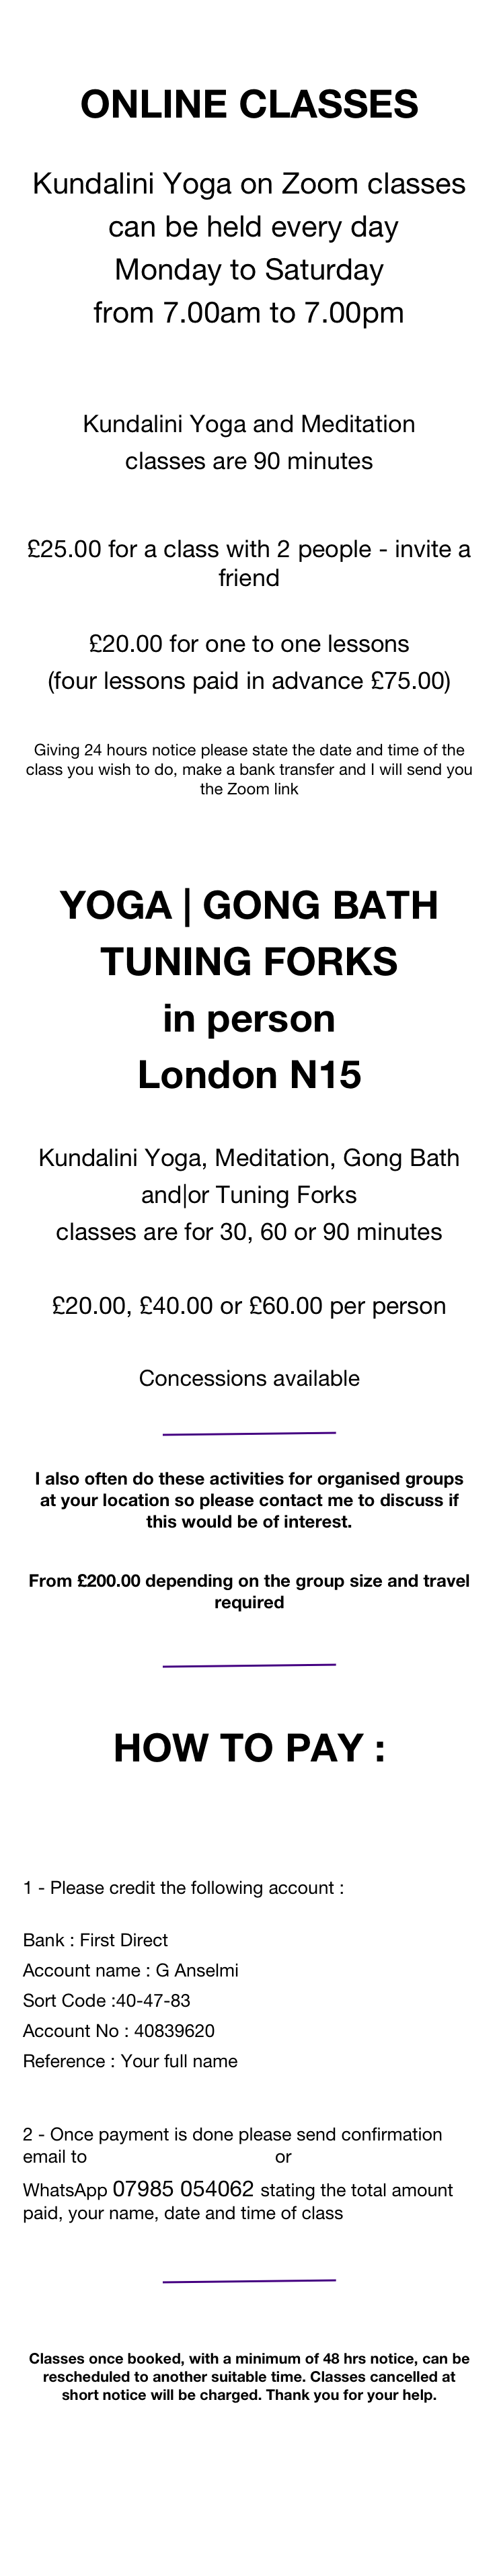 

ONLINE CLASSES:



Kundalini Yoga on Zoom classes
 can be held every day 
Monday to Saturday
from 8 am to 7.30 pm 

Kundalini Yoga and Meditation
classes are from 30 to 90 minutes
 
£10 per person
Five lessons £45 to be used in a month
 £15 for one to one lessons

Concessions available please email Siri Atma


Giving 24 hours notice please state the date and time of the class you wish to do, make a bank transfer and we will send you the Zoom link
 
￼
  
HOW TO PAY and BOOK the class :



1 - Please credit the following account : 
Bank : First Direct
Account name : G Anselmi
Sort Code :40-47-83
Account No : 40839620
Reference : Your full name  
2 - Once payment is done please send confirmation email to siriatmas@yahoo.com with following details: 

Total amount paid : £ .............. name : ..................... 
date of class : ............   and time ........  
 
￼


Please : class once booked cannot be cancelled, with minimum of 48 hrs notice can be rescheduled to another suitable time. Can be rescheduled once only. Thank you for your help.
 


